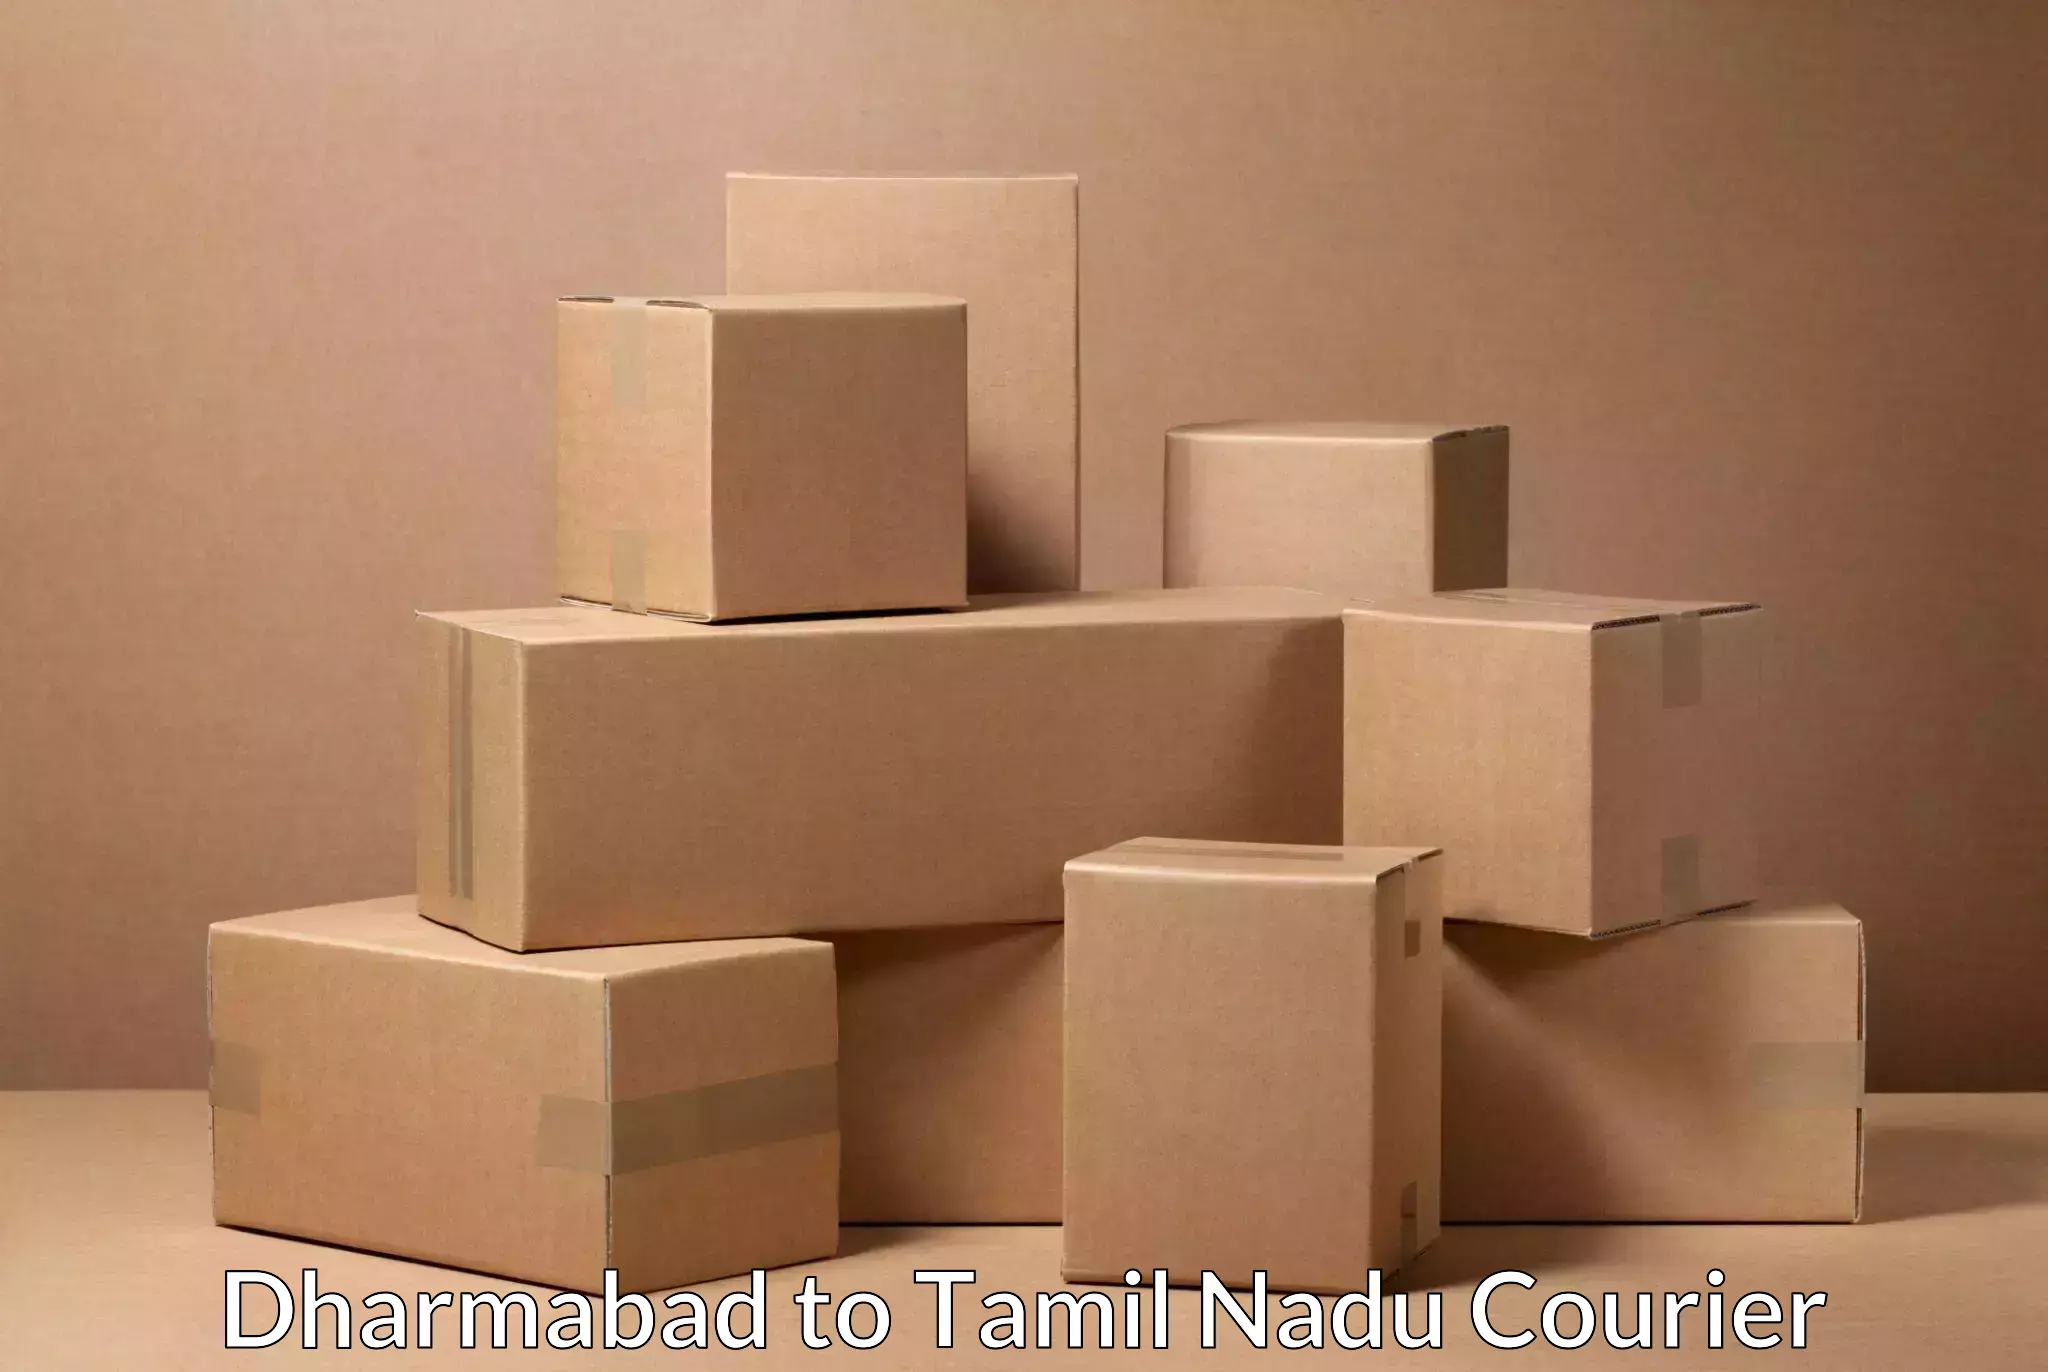 Full-service courier options Dharmabad to Usilampatti